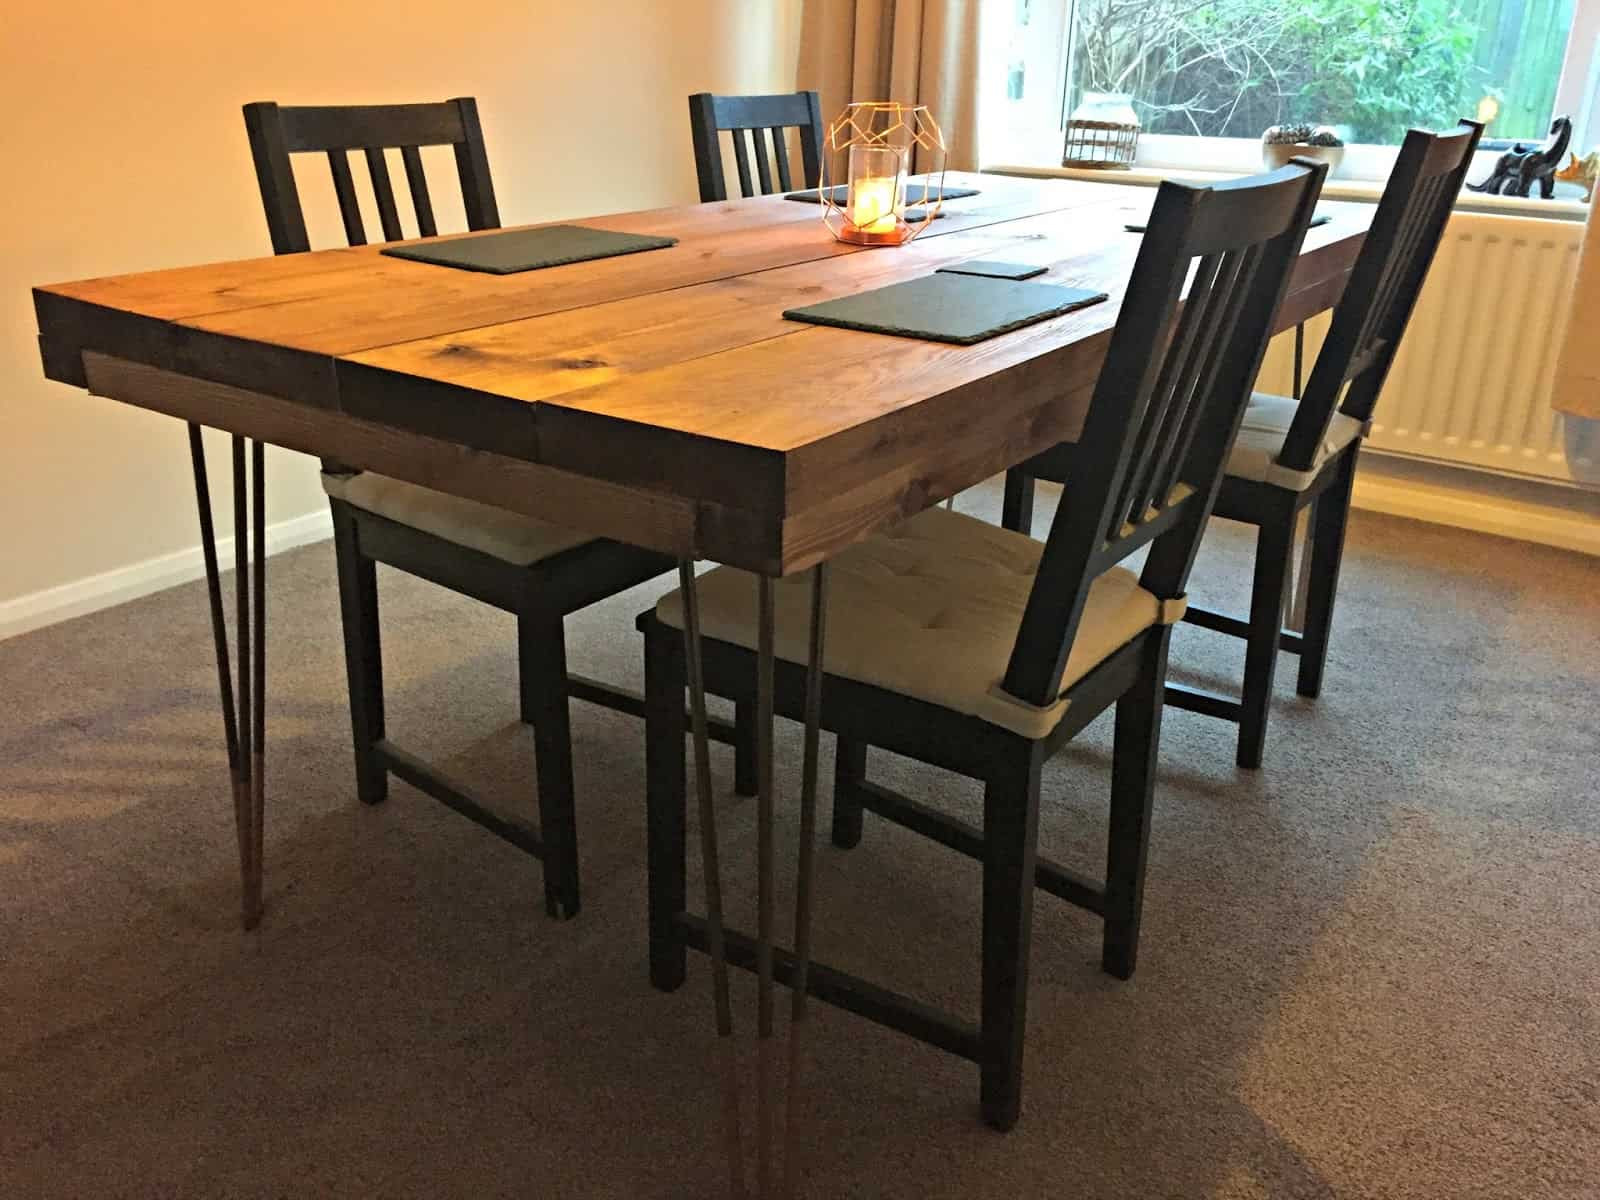 DIY Hairpin Leg Dining Table
 Eat In More ten Thanks to Our DIY Dining Table Ideas